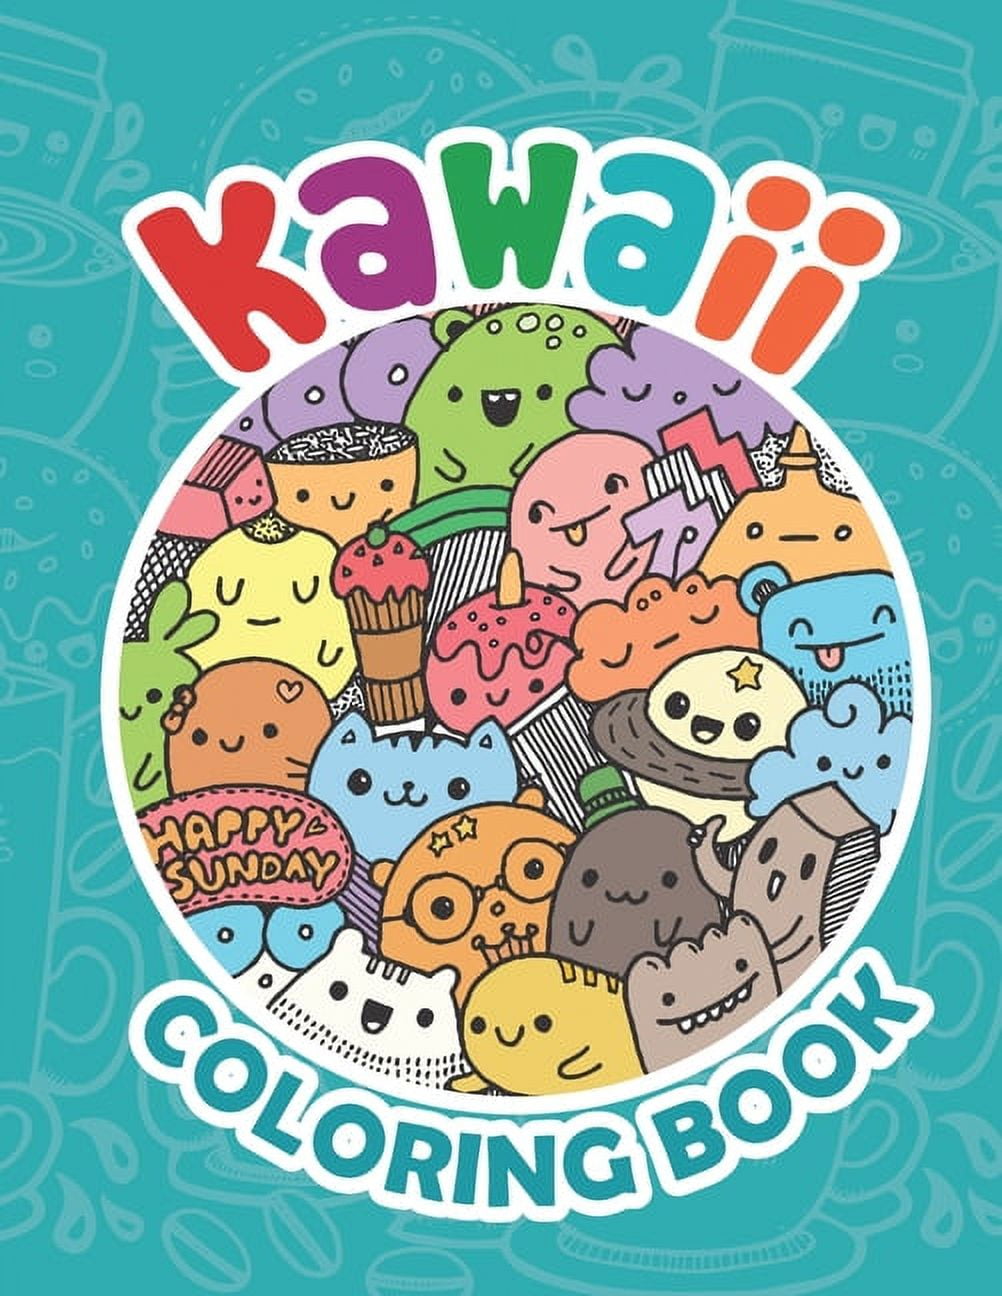 Kawaii Coloring Book: Coloring Book For Adults And Kids Relaxing & Inspiration, Kawaii Coloring Books For Girls [Book]